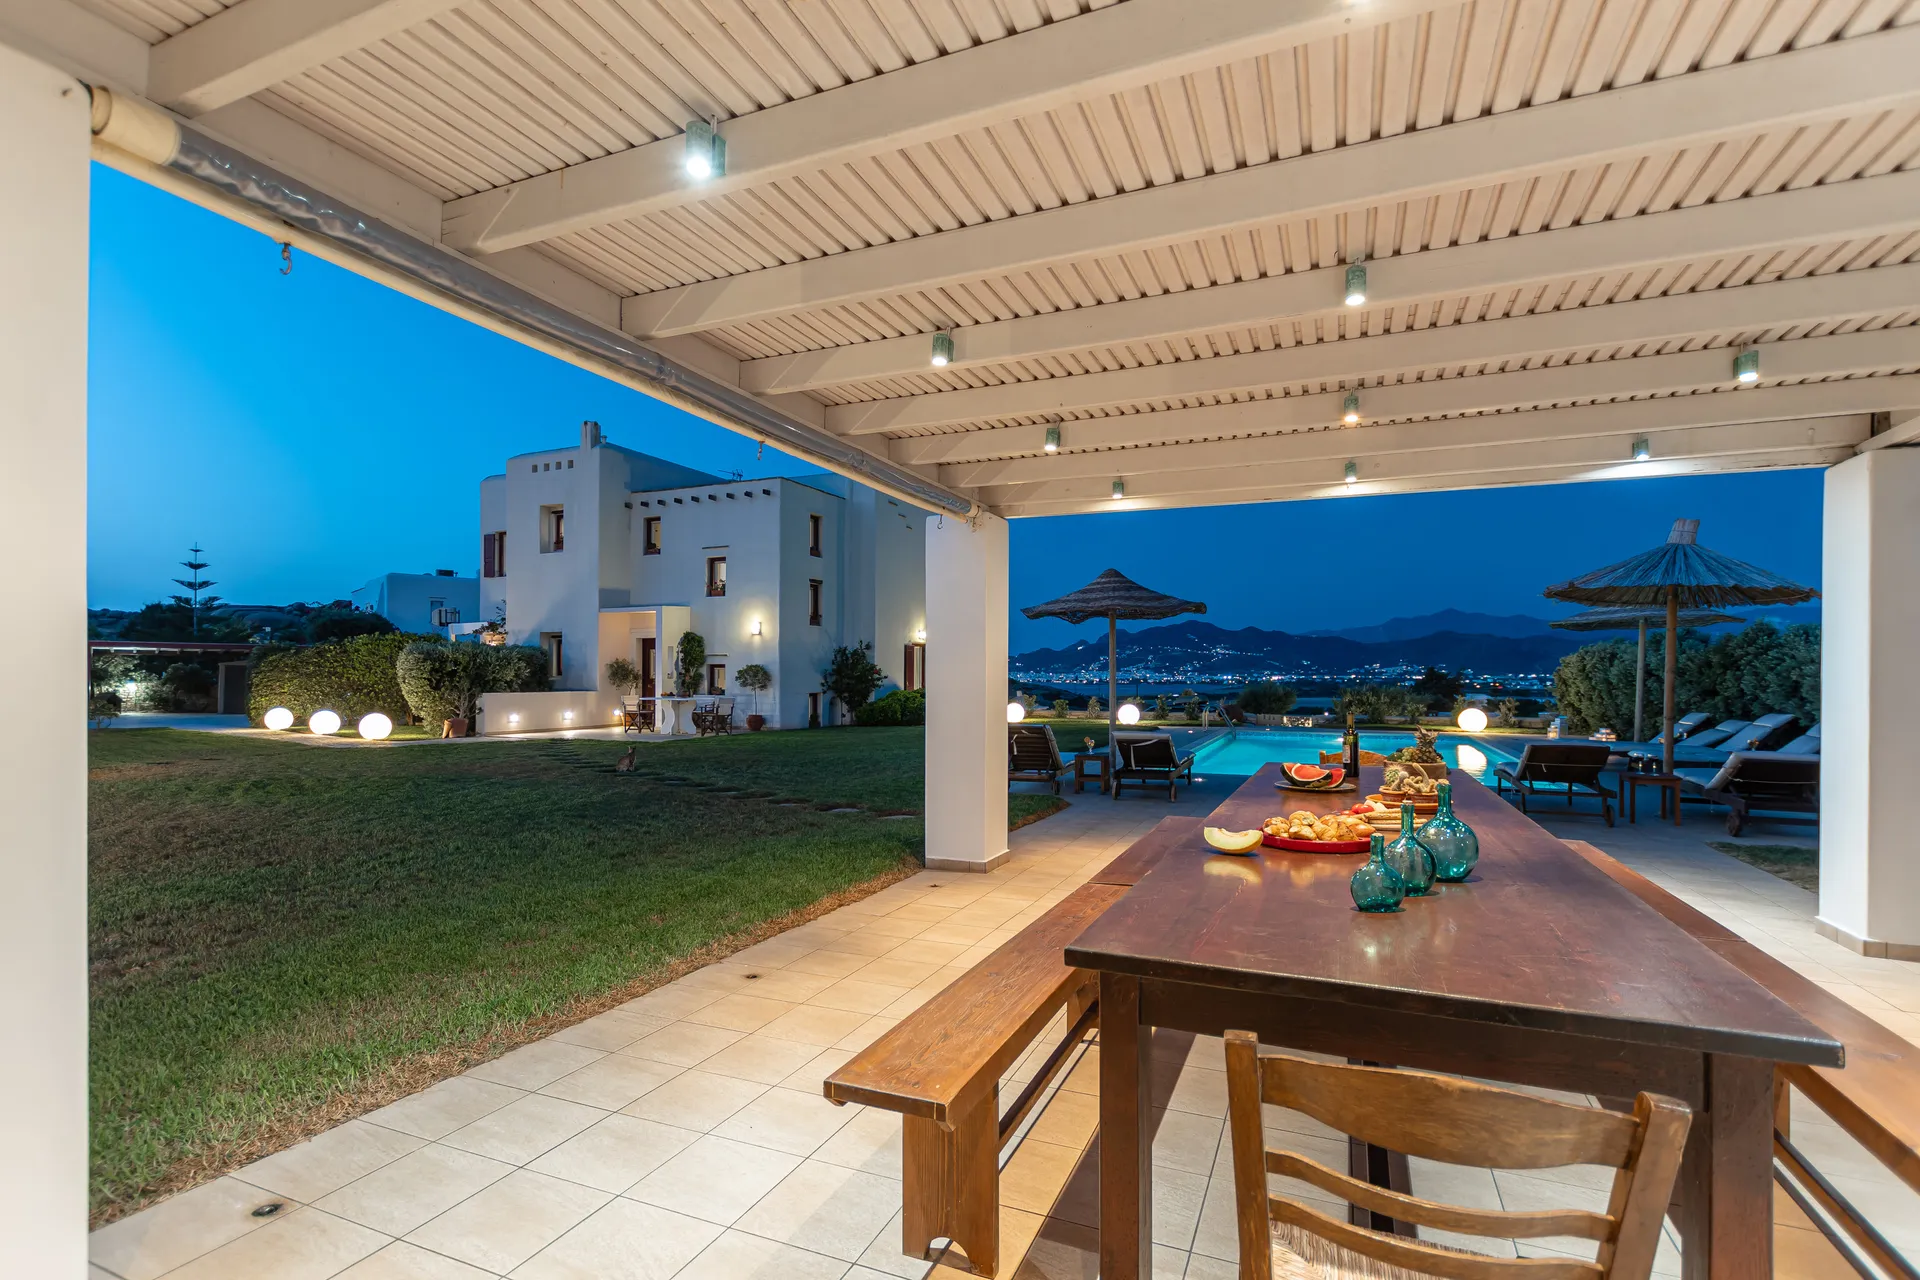 The villa has two levels, a swimming pool, and offers a marvelous view of the sea and of Naxos town. Villa I has a private entrance, basketball court and free parking onsite, as well as outdoor showers by the pool. It also has an outdoor barbecue area with a dining table set, where you can enjoy and relax with your friends and family. Villa I is ideal for those who seek a quiet place with privacy. From the fully equipped and functional kitchen to the cozy living area and the large swimming pool you will definitely want to spend as much in-house time as possible with many plants, herbs, and trees that will make your stay a pleasure. A cost-effective holiday option for families with children, groups of friends, or a romantic sanctuary for couples and honeymooners.